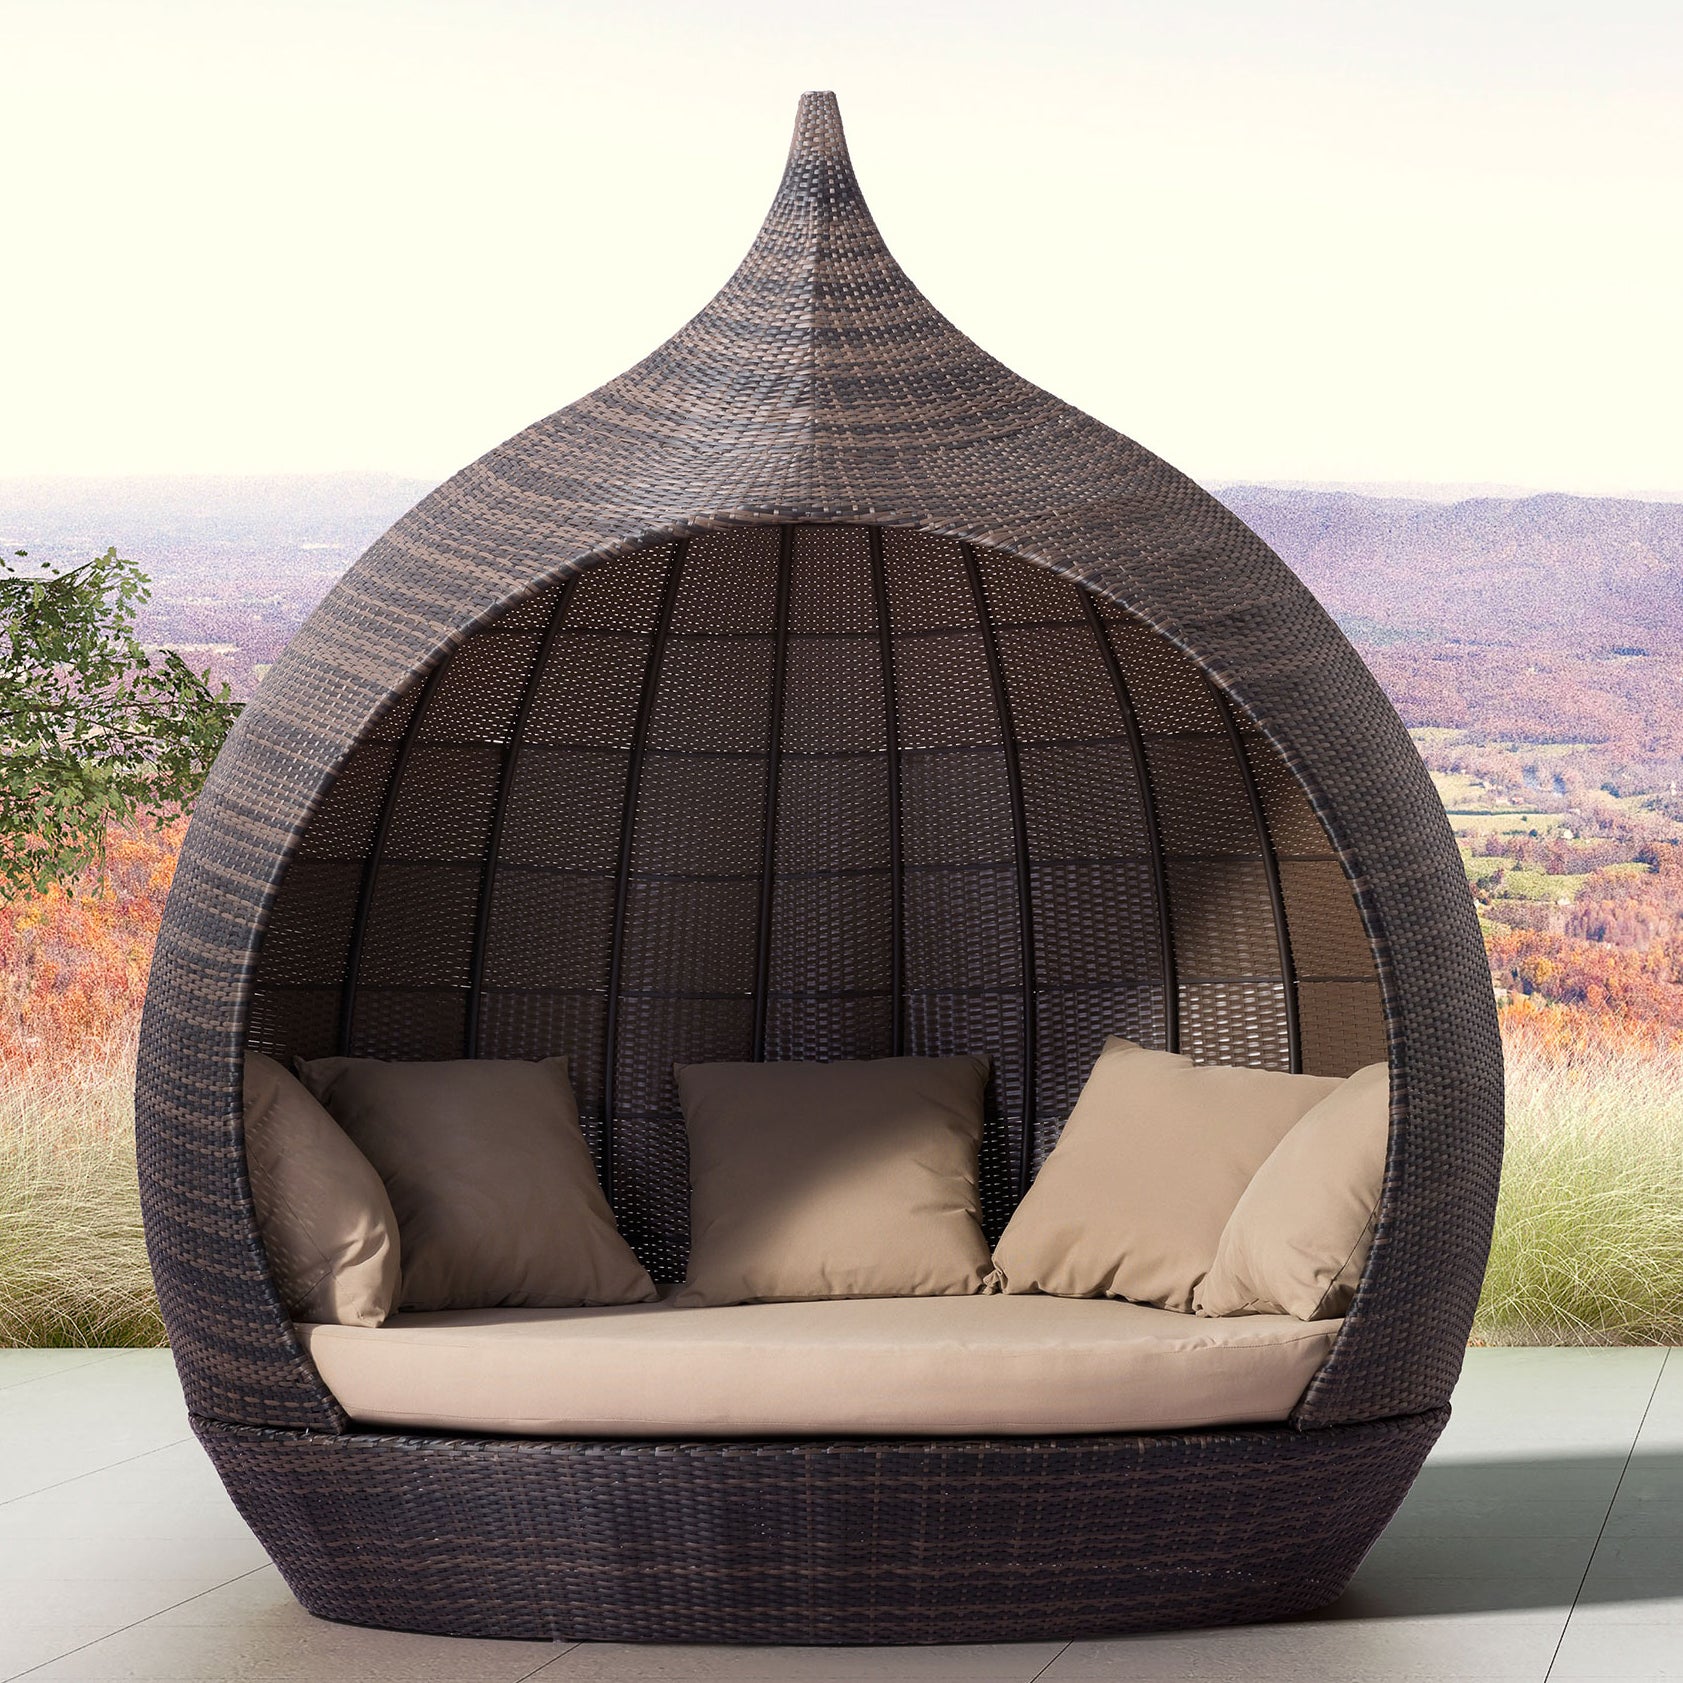 Teardrop Shaped Daybed